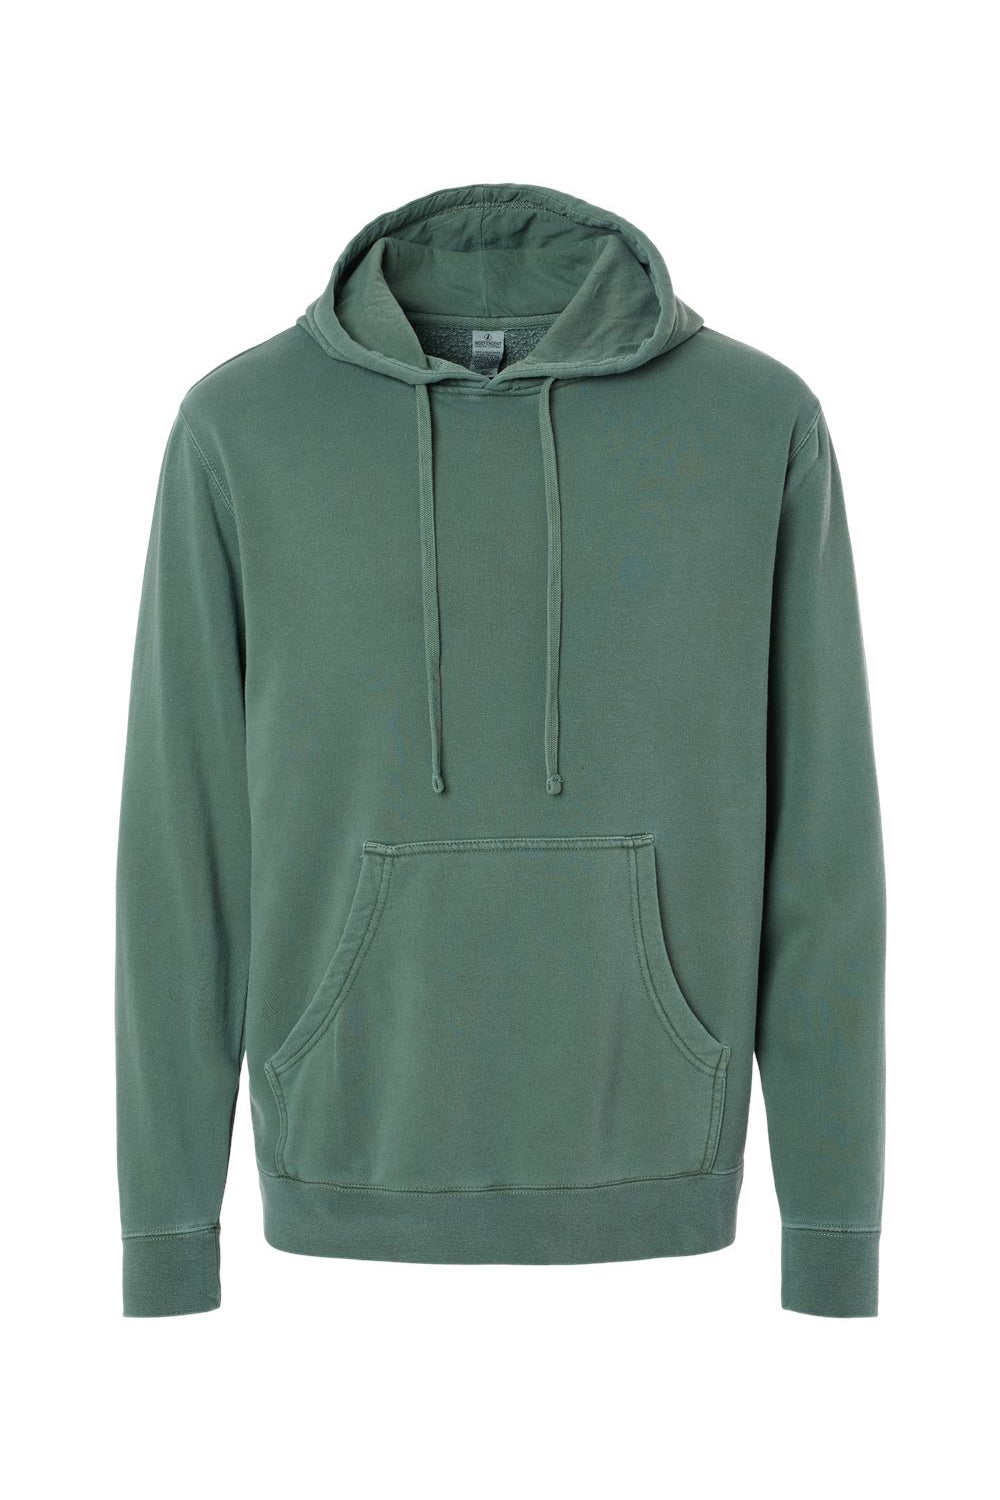 Independent Trading Co. PRM4500 Mens Pigment Dyed Hooded Sweatshirt Hoodie Alpine Green Flat Front